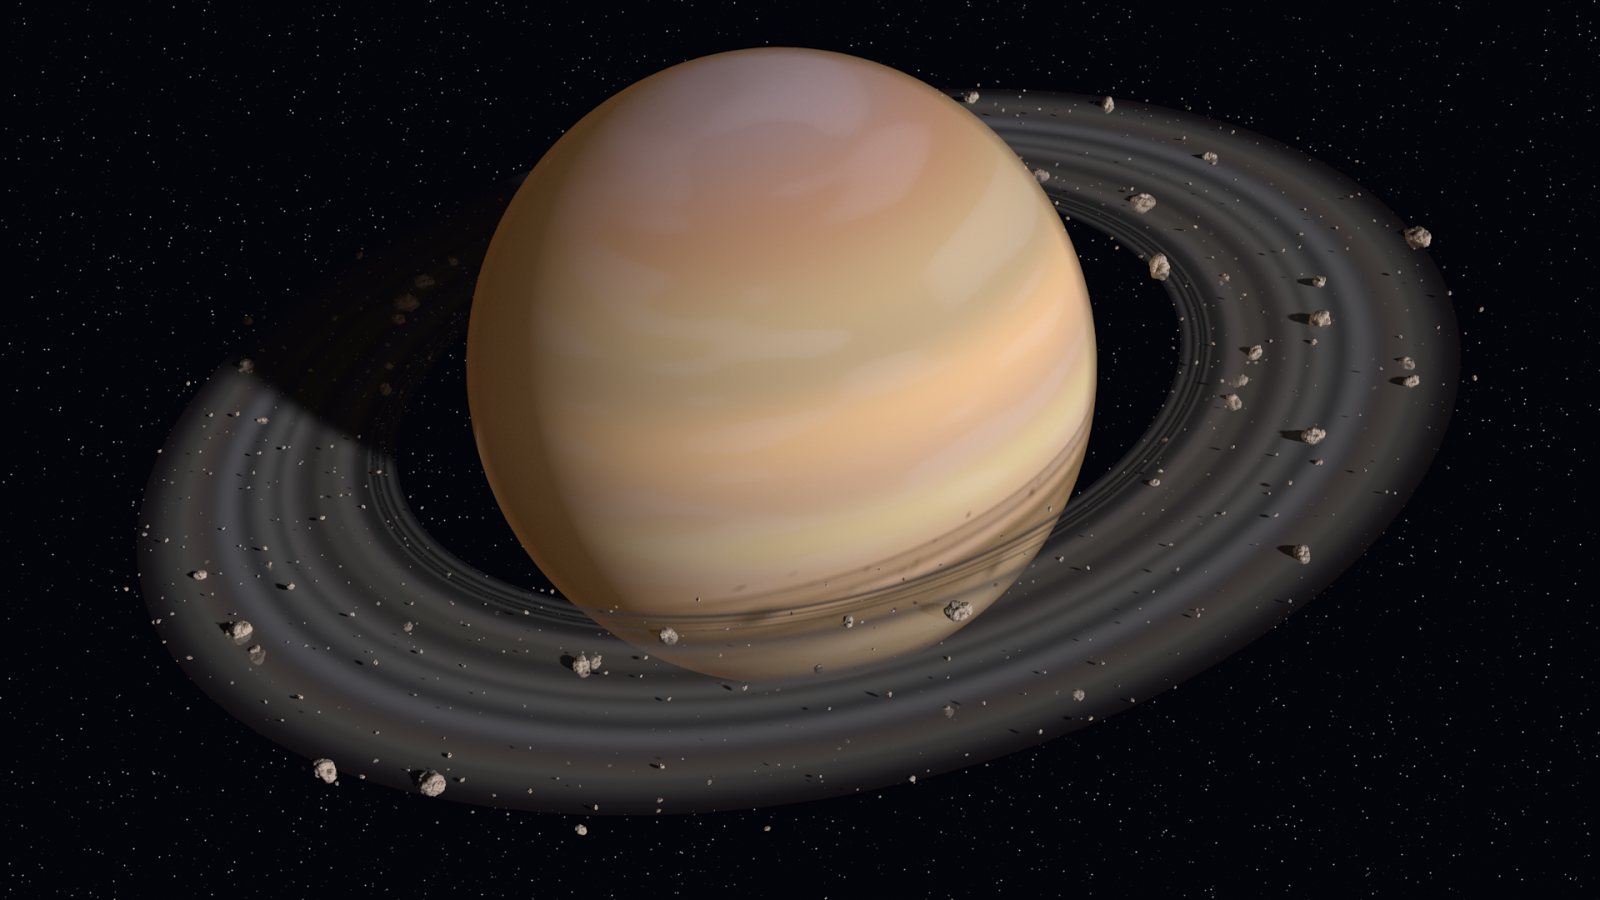 This Planet Has Rings 200 Times Larger than Saturn's